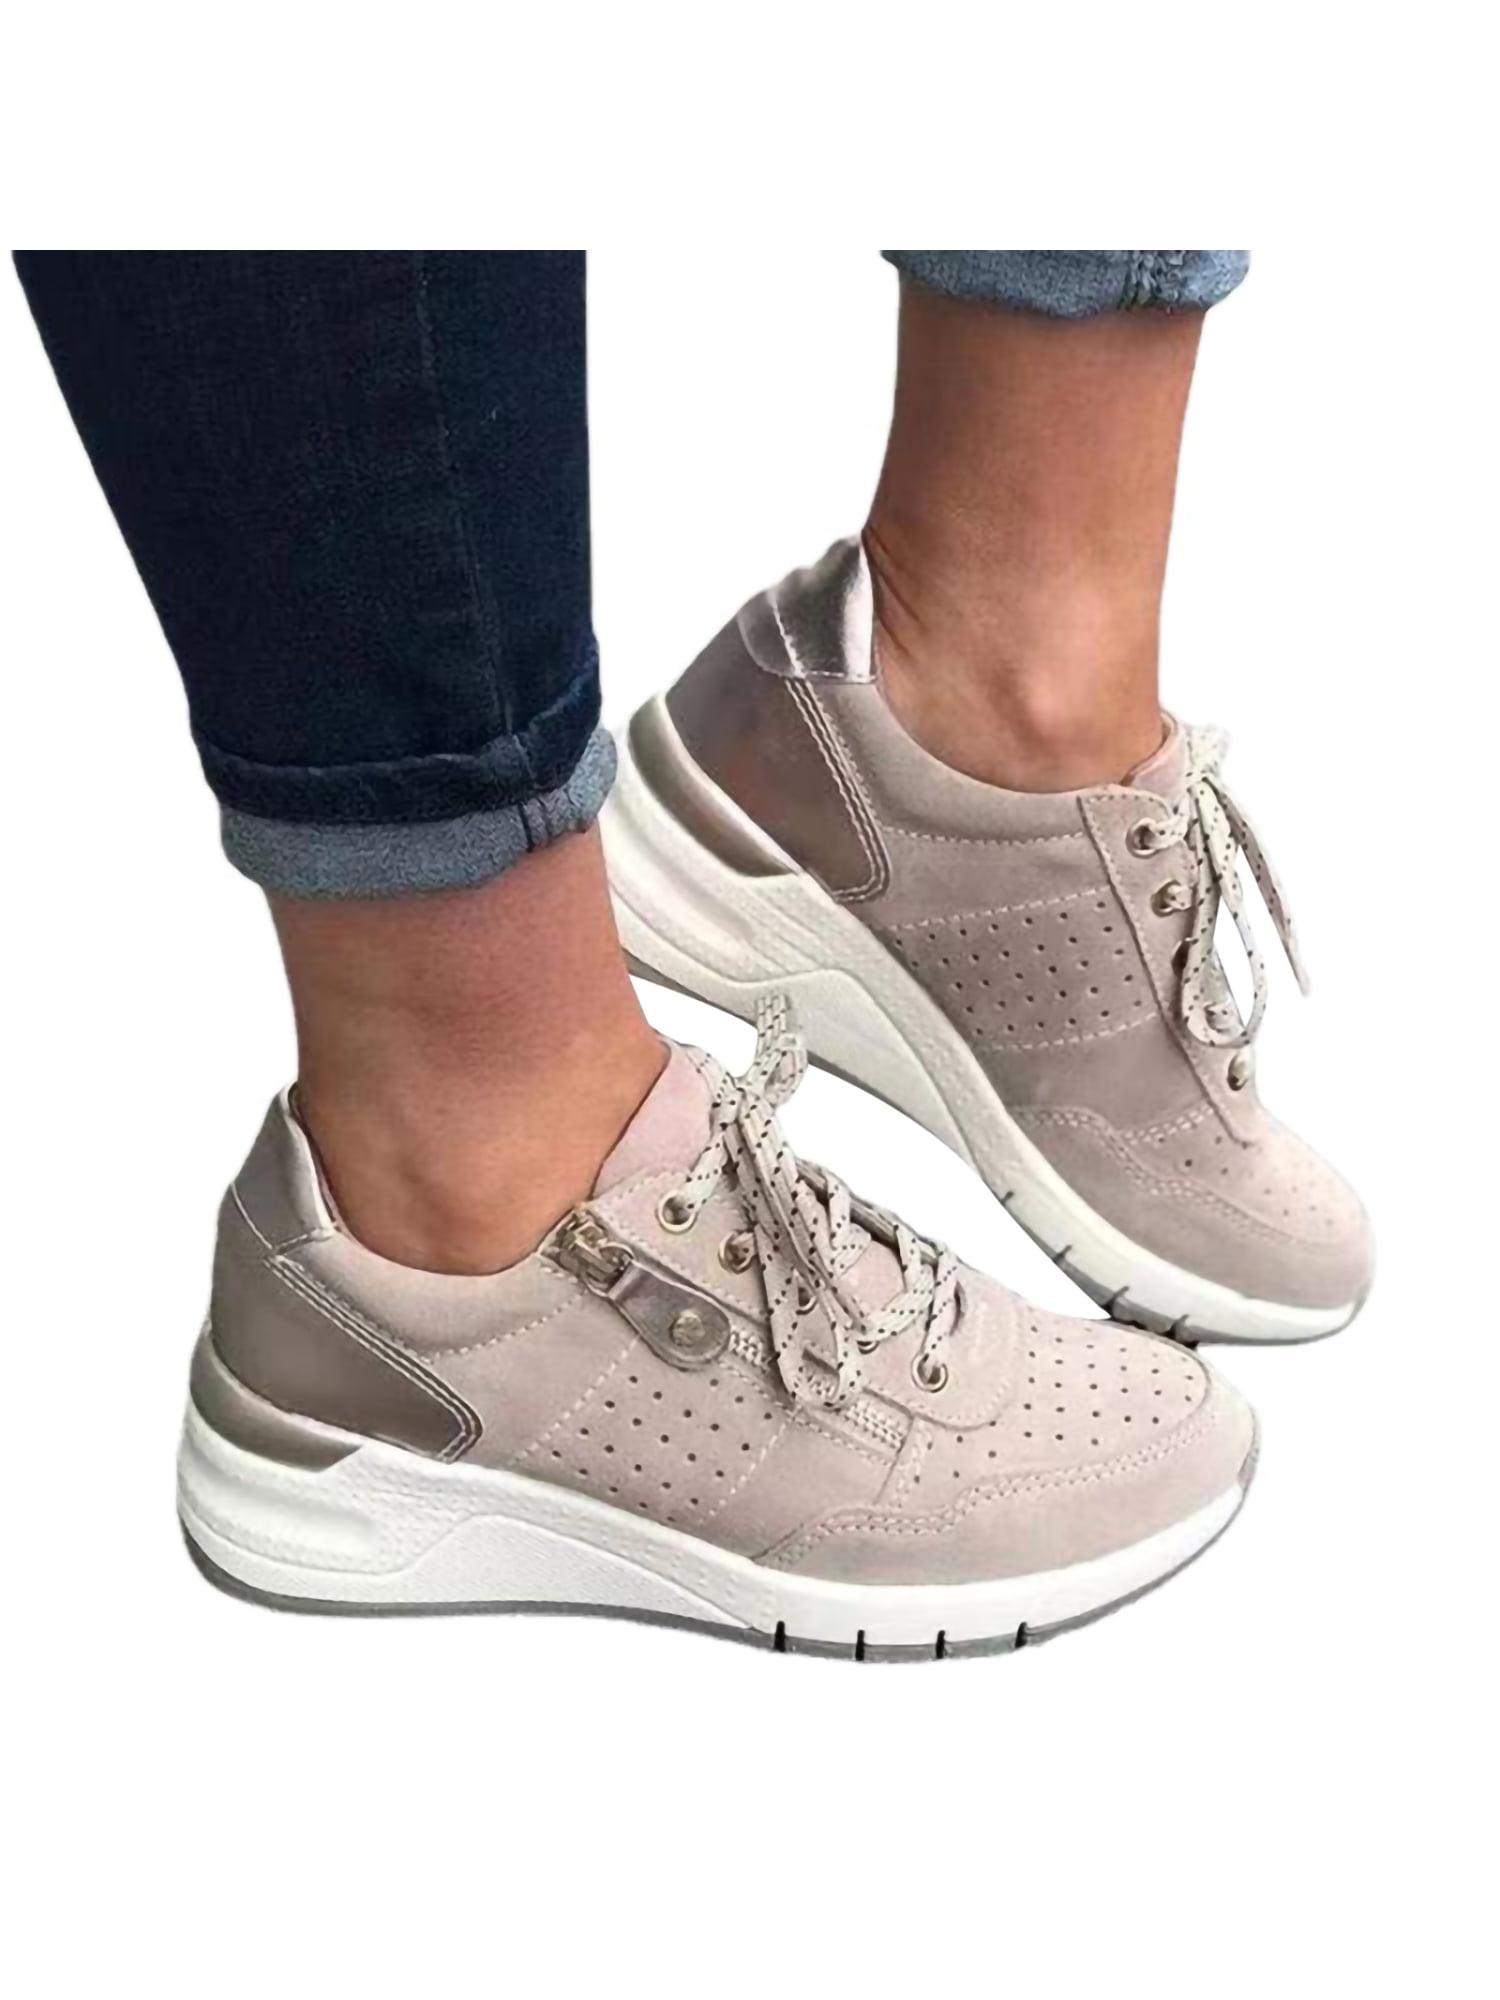 New Women's Trendy Trainers Lace Up Platform Ladies Running Shoes Ankle Boots 